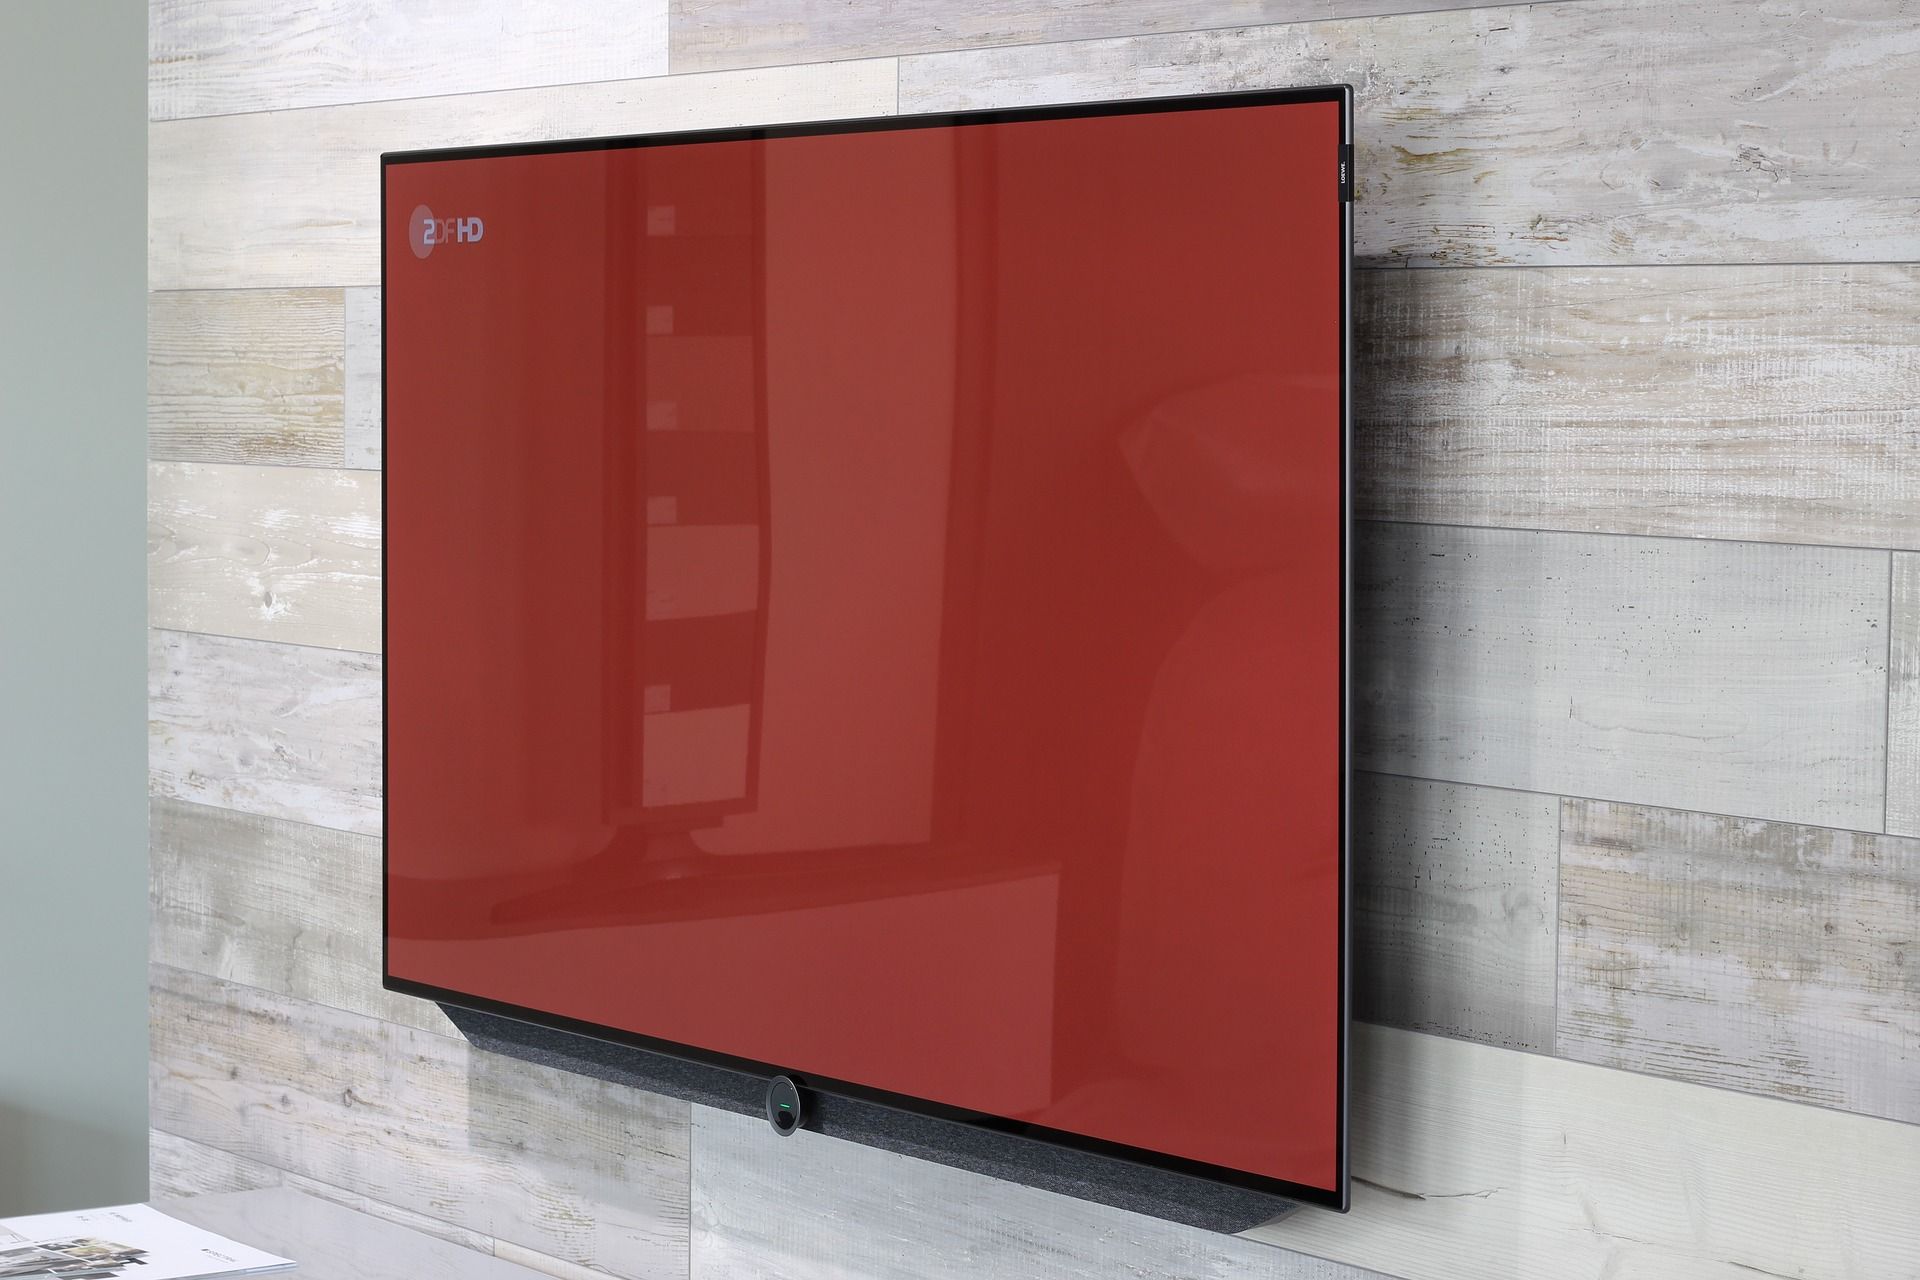 large television with red display mounted on wooden wall